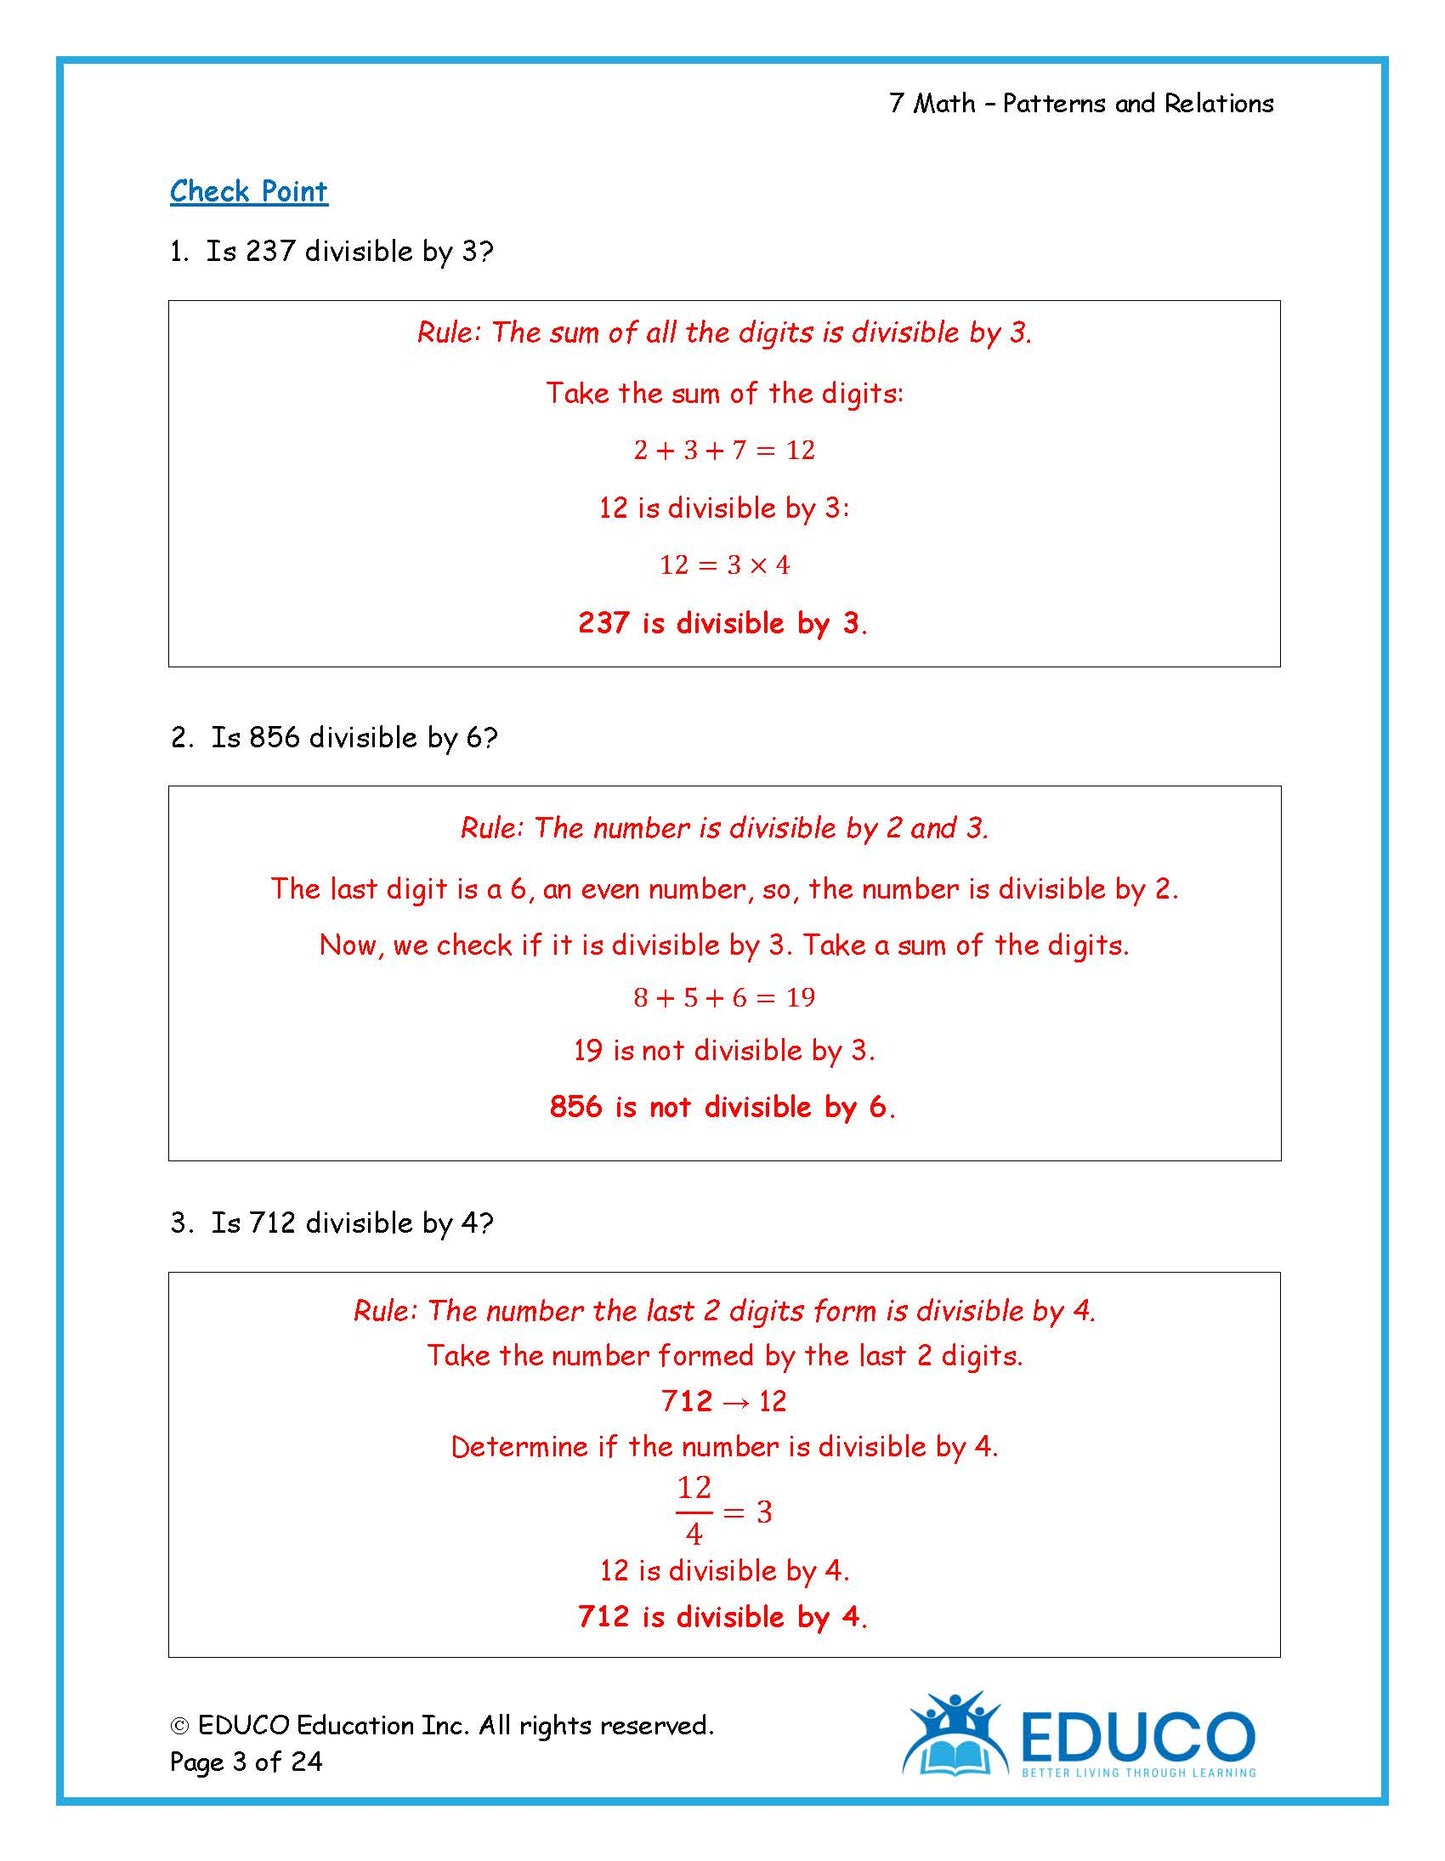 Unit 1: Patterns and Relations - Grade 7 Math (Digital Download)